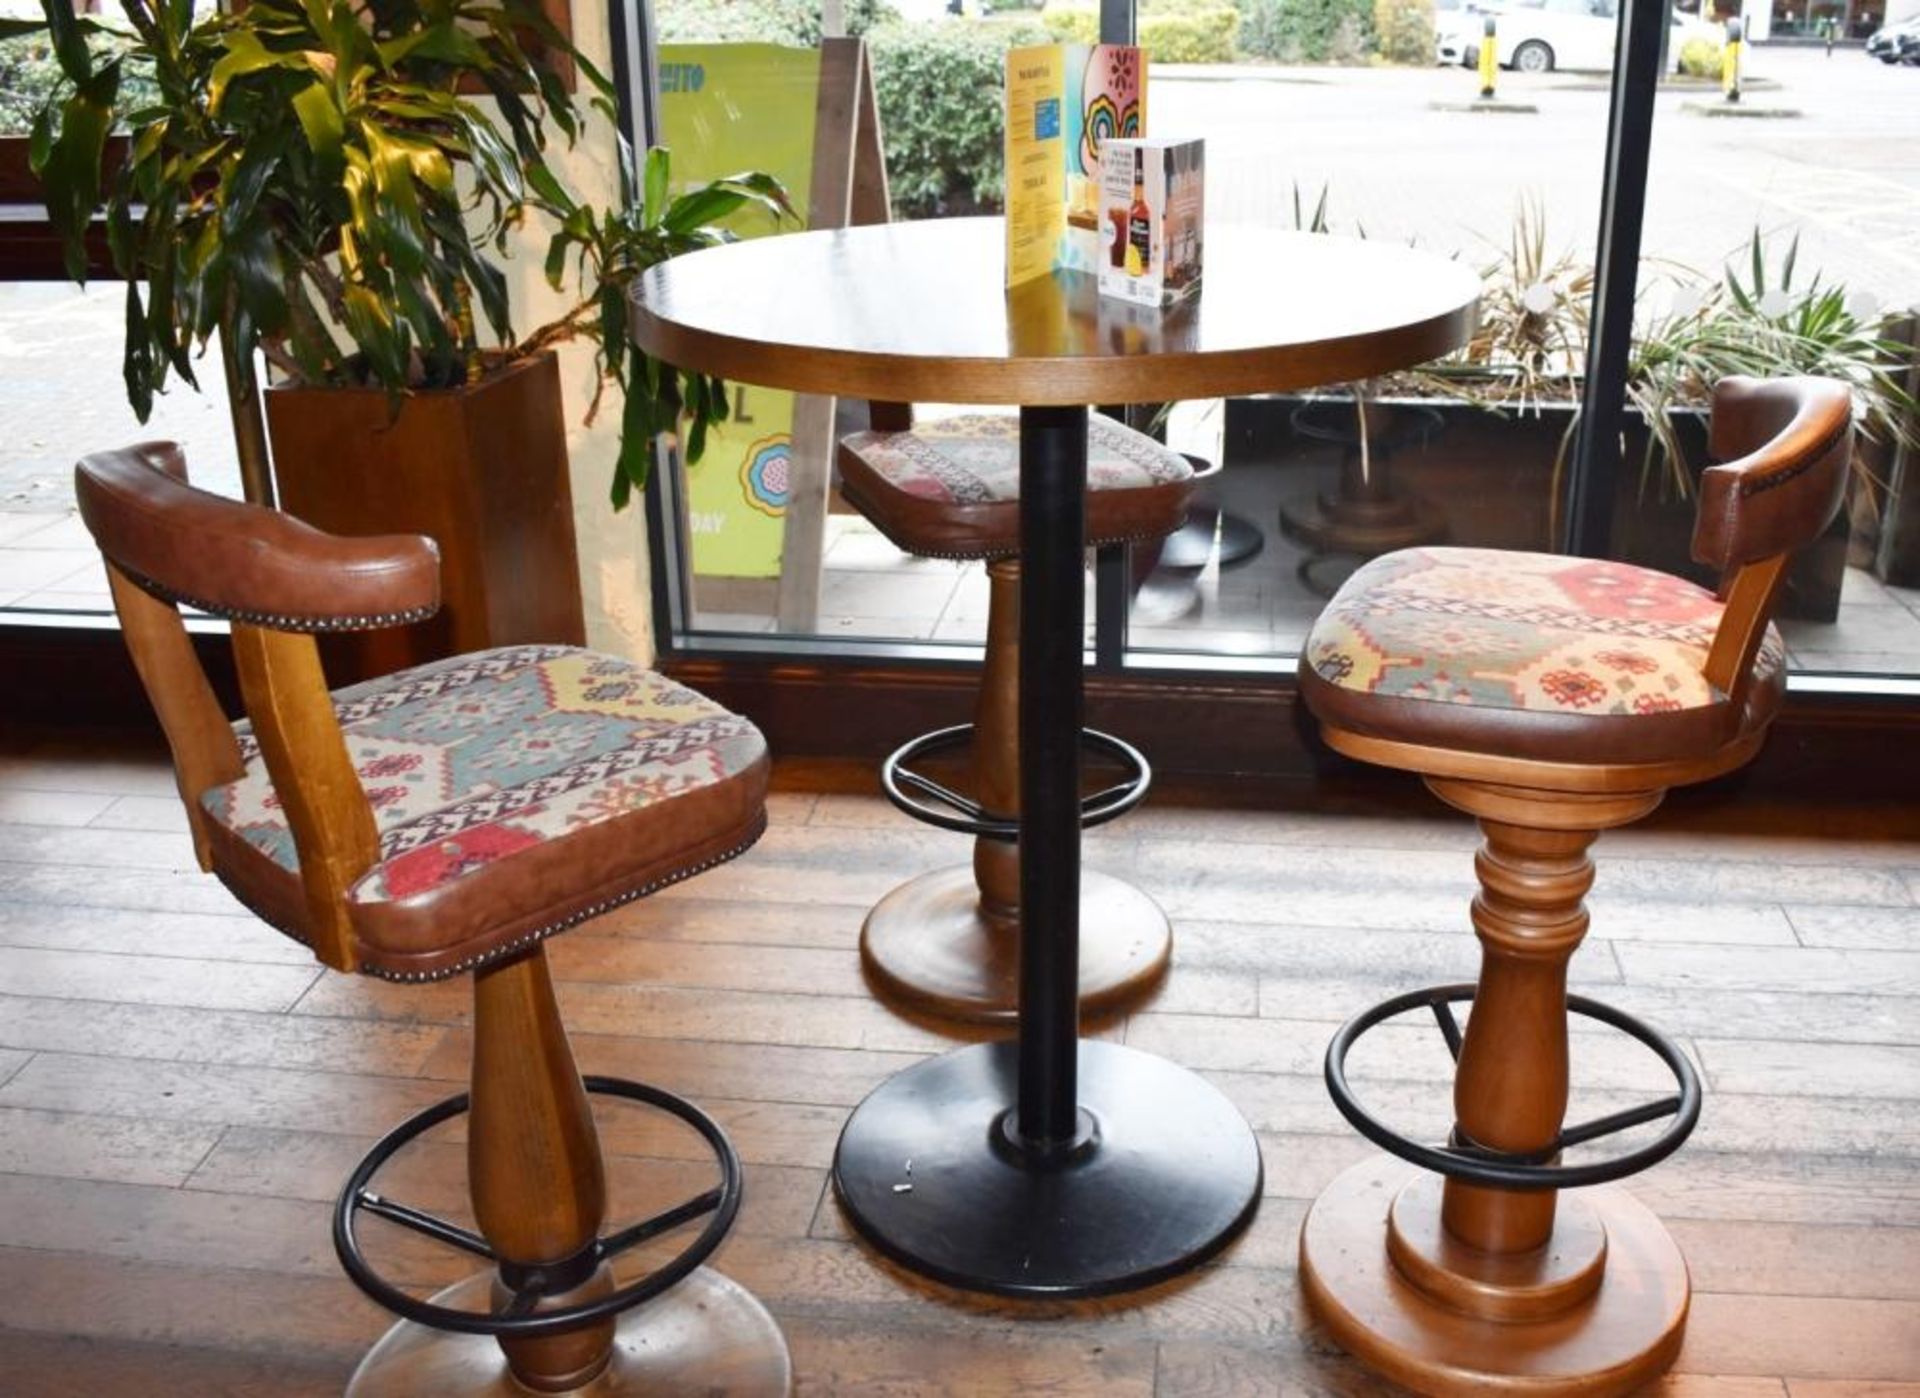 2 x Poser Bar Tables With Black Cast Iron Base and Circular Brown Wooden Tops - H112 x W88 cms - CL - Image 3 of 3